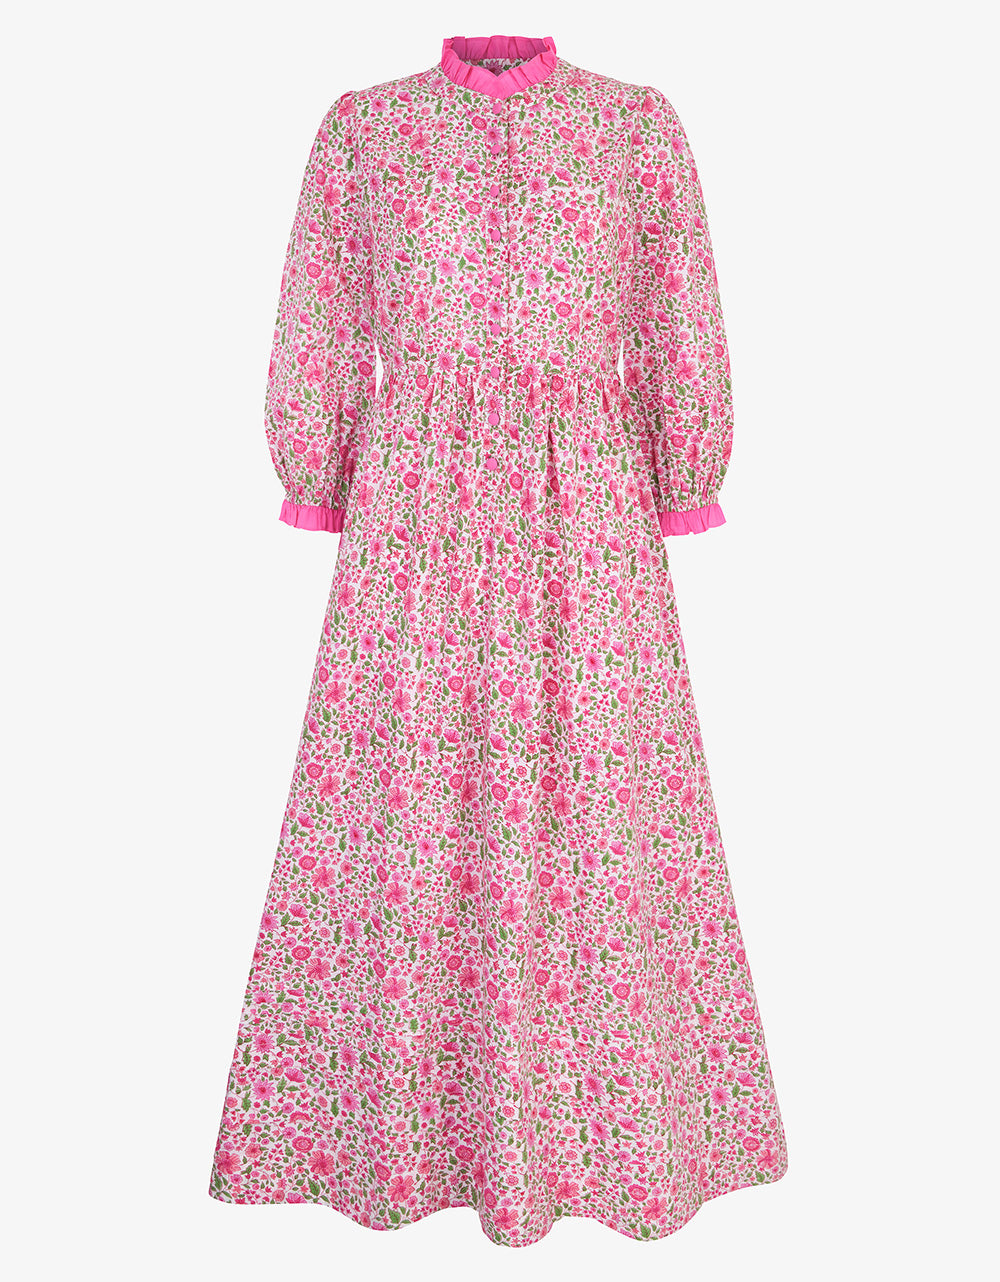 Hollyhock Meadow Tilly Dress - Pink City Prints